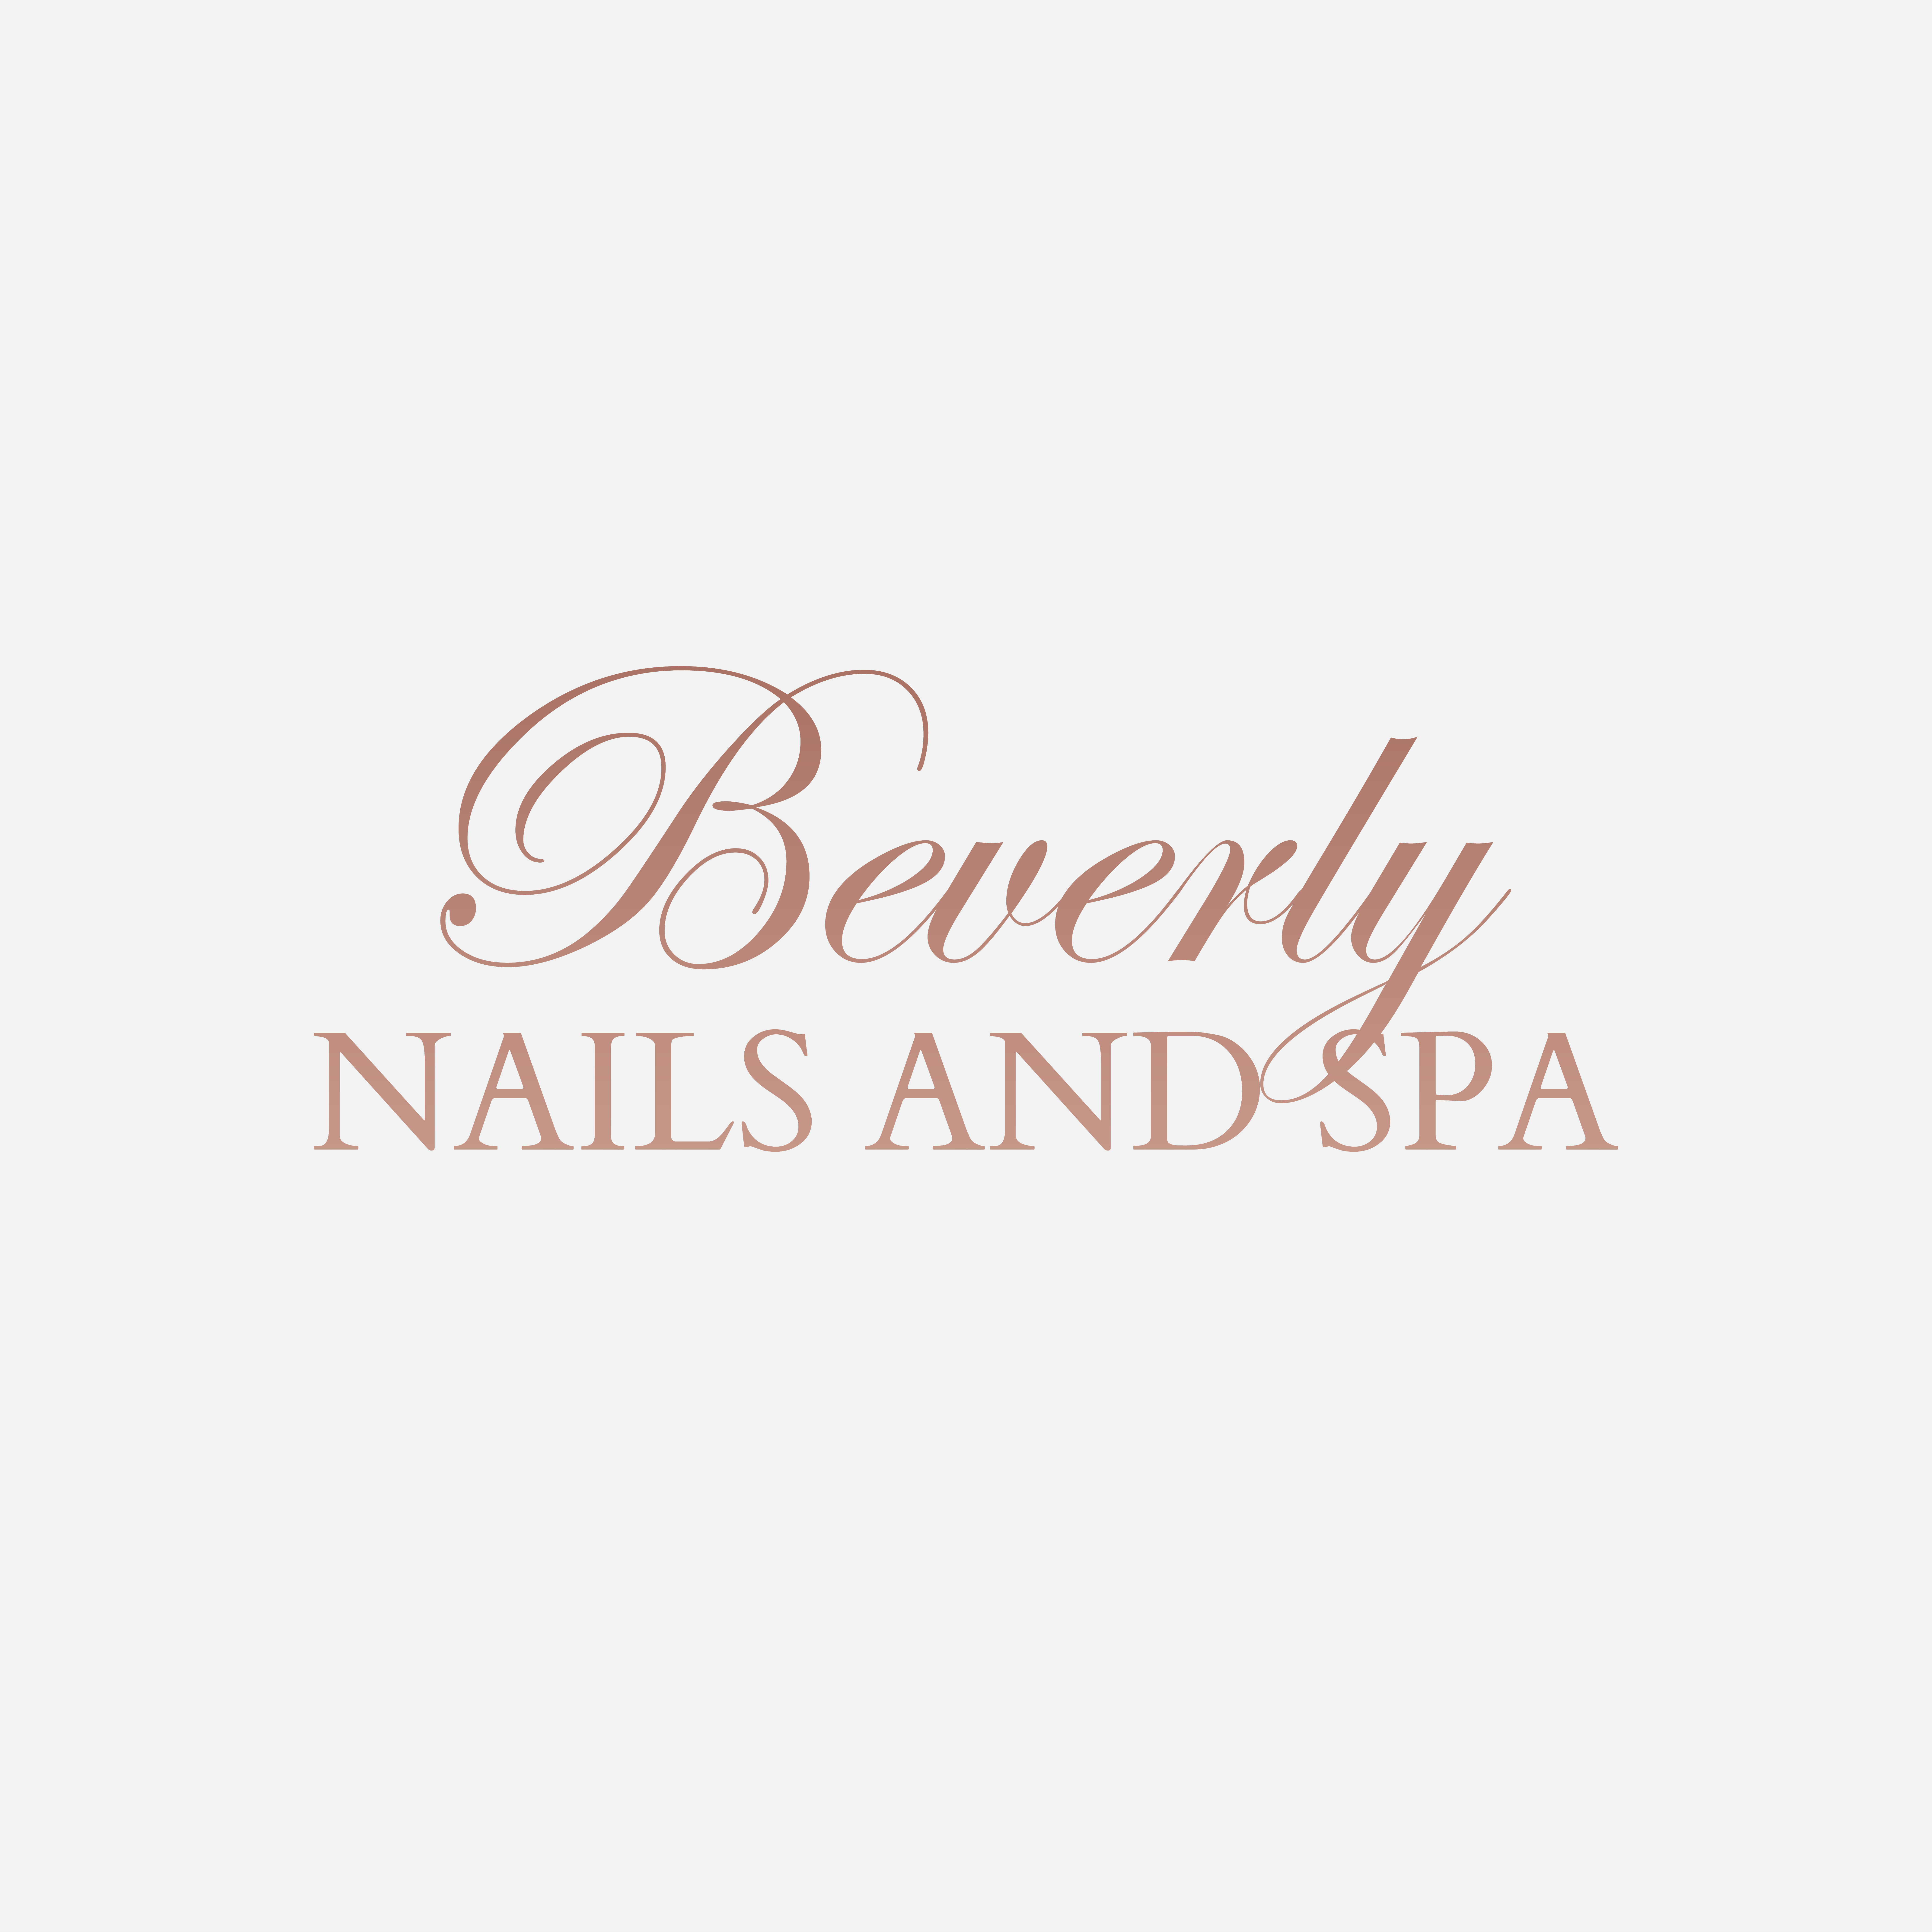 Beverly Nails And Spa